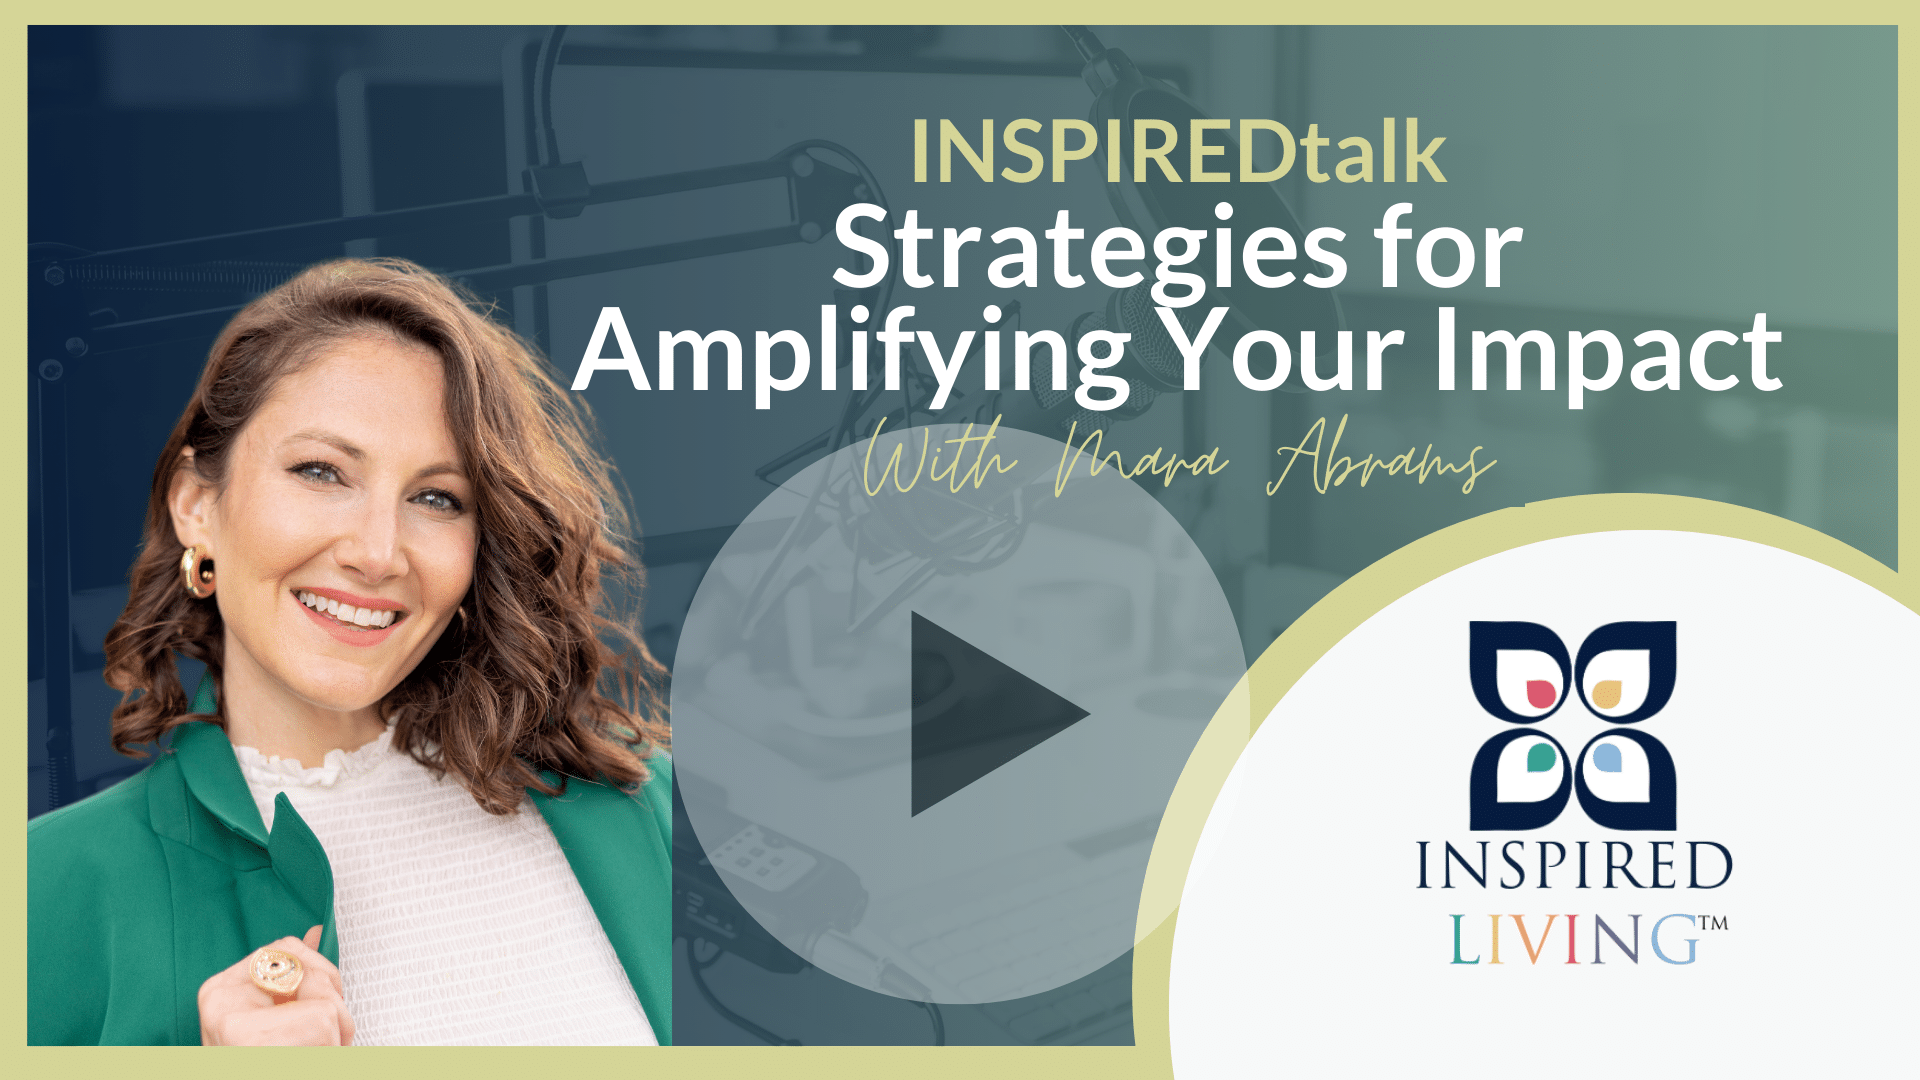 Watch the INSPIREDtalk with Mara Abrams on YouTube